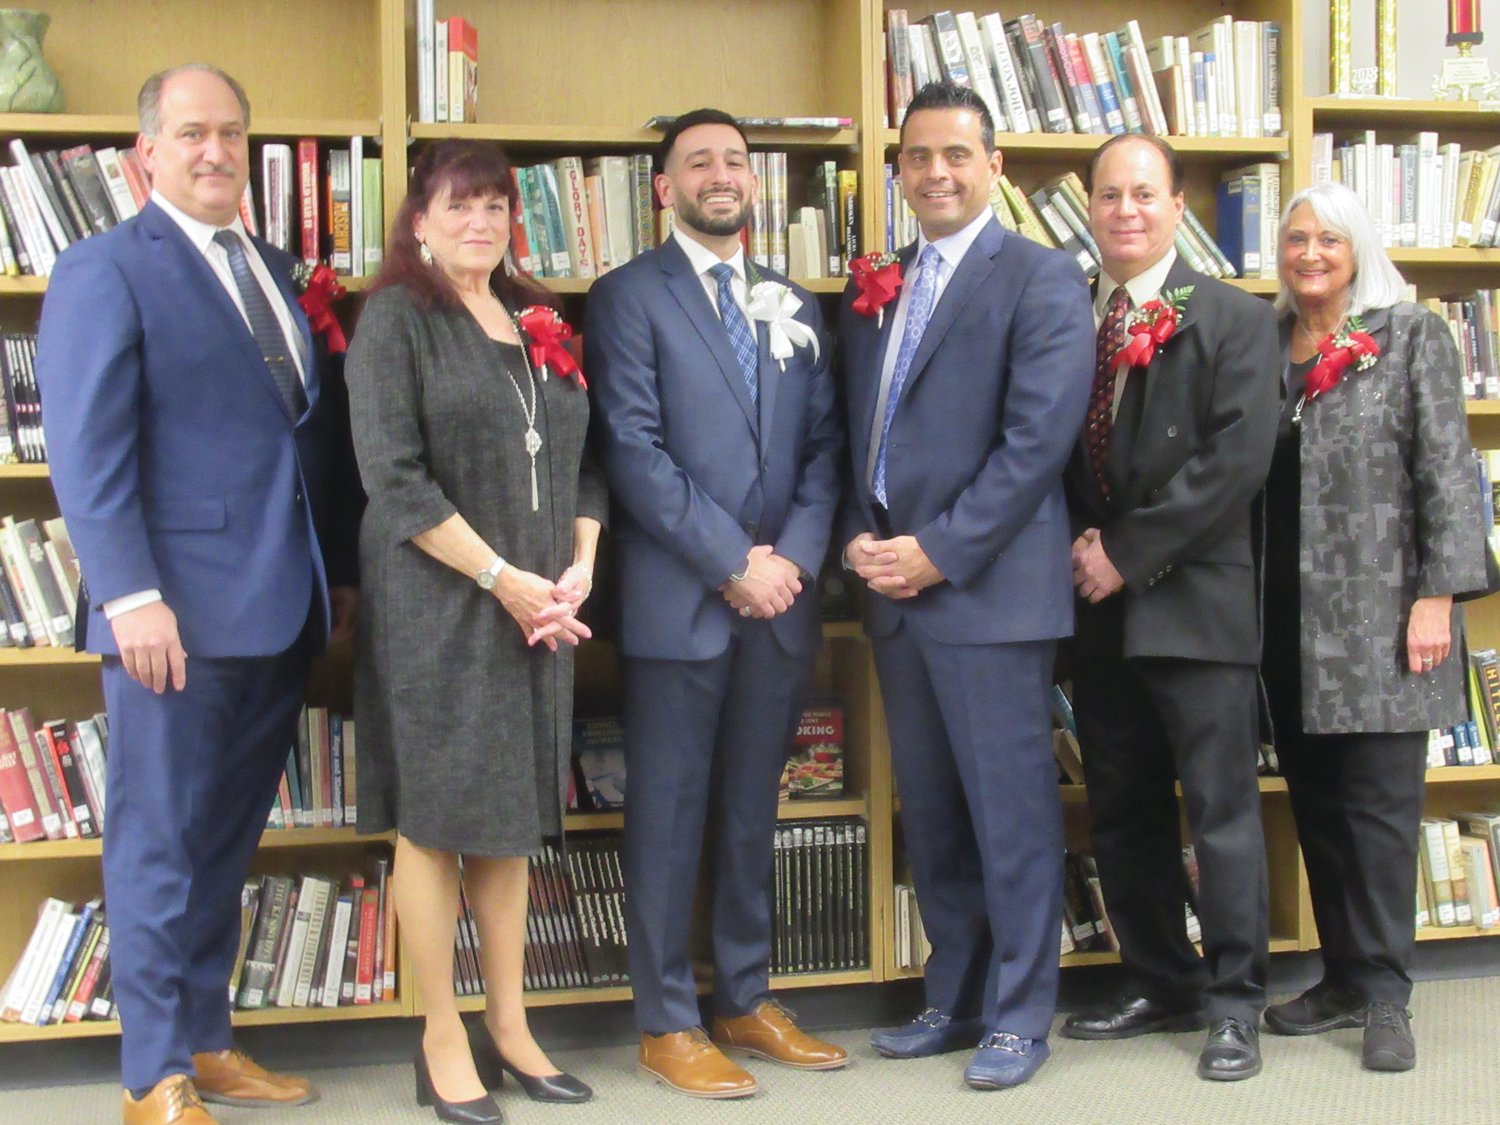 TOWN COUNCIL: The new Johnston Town Council joins Mayor Joseph Poliena Jr. prior to Monday’s swearing in ceremony. Councilors are Robert Civetti, Linda Folcarelli, President Robert Russo and Vice President Lauren Garzone.